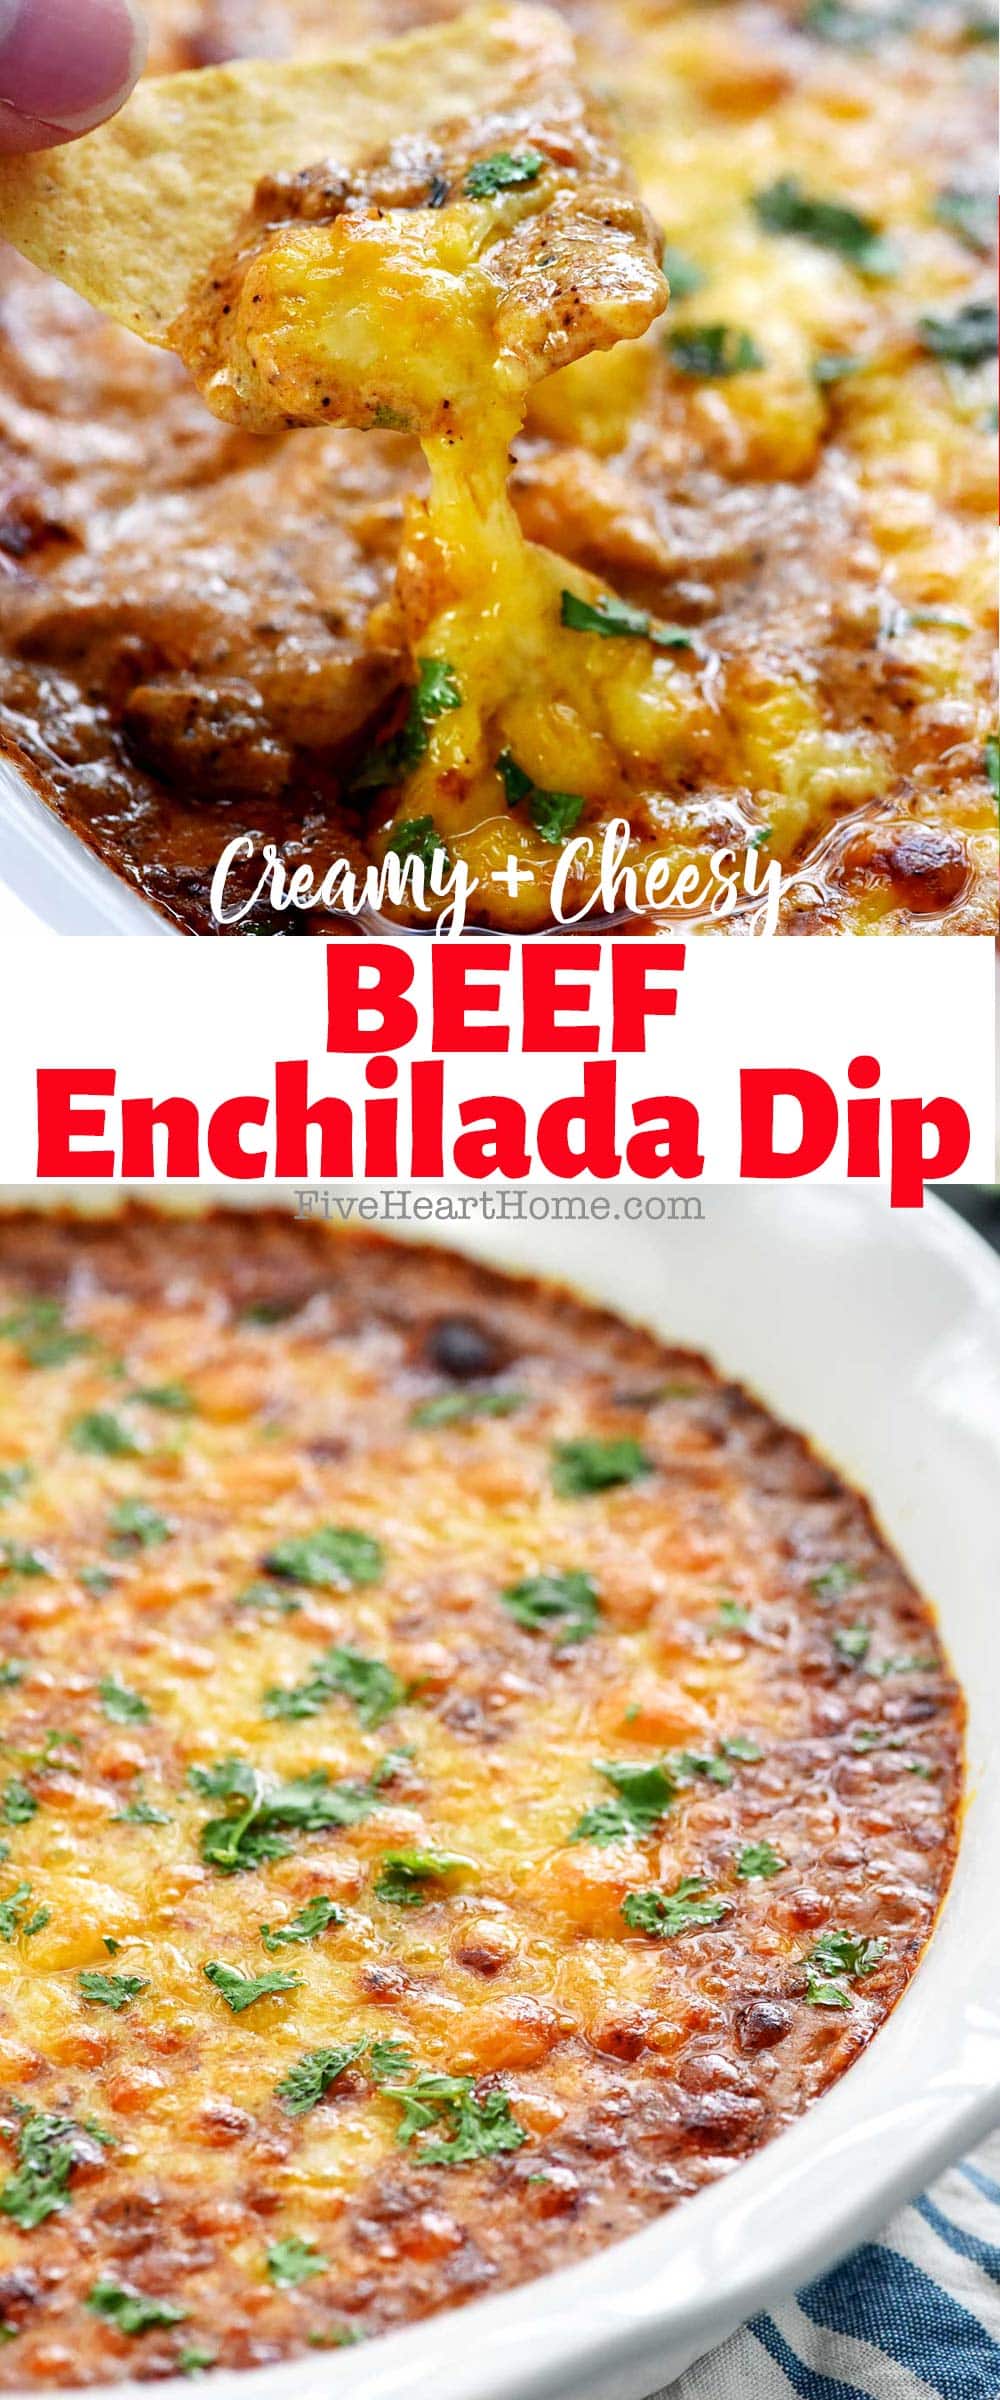 Beef Enchilada Dip ~ creamy, cheesy, and boasts the delicious flavor of beef enchiladas in an easy-to-make, addictive dip...perfect for parties, get-togethers, and game day! | FiveHeartHome.com via @fivehearthome